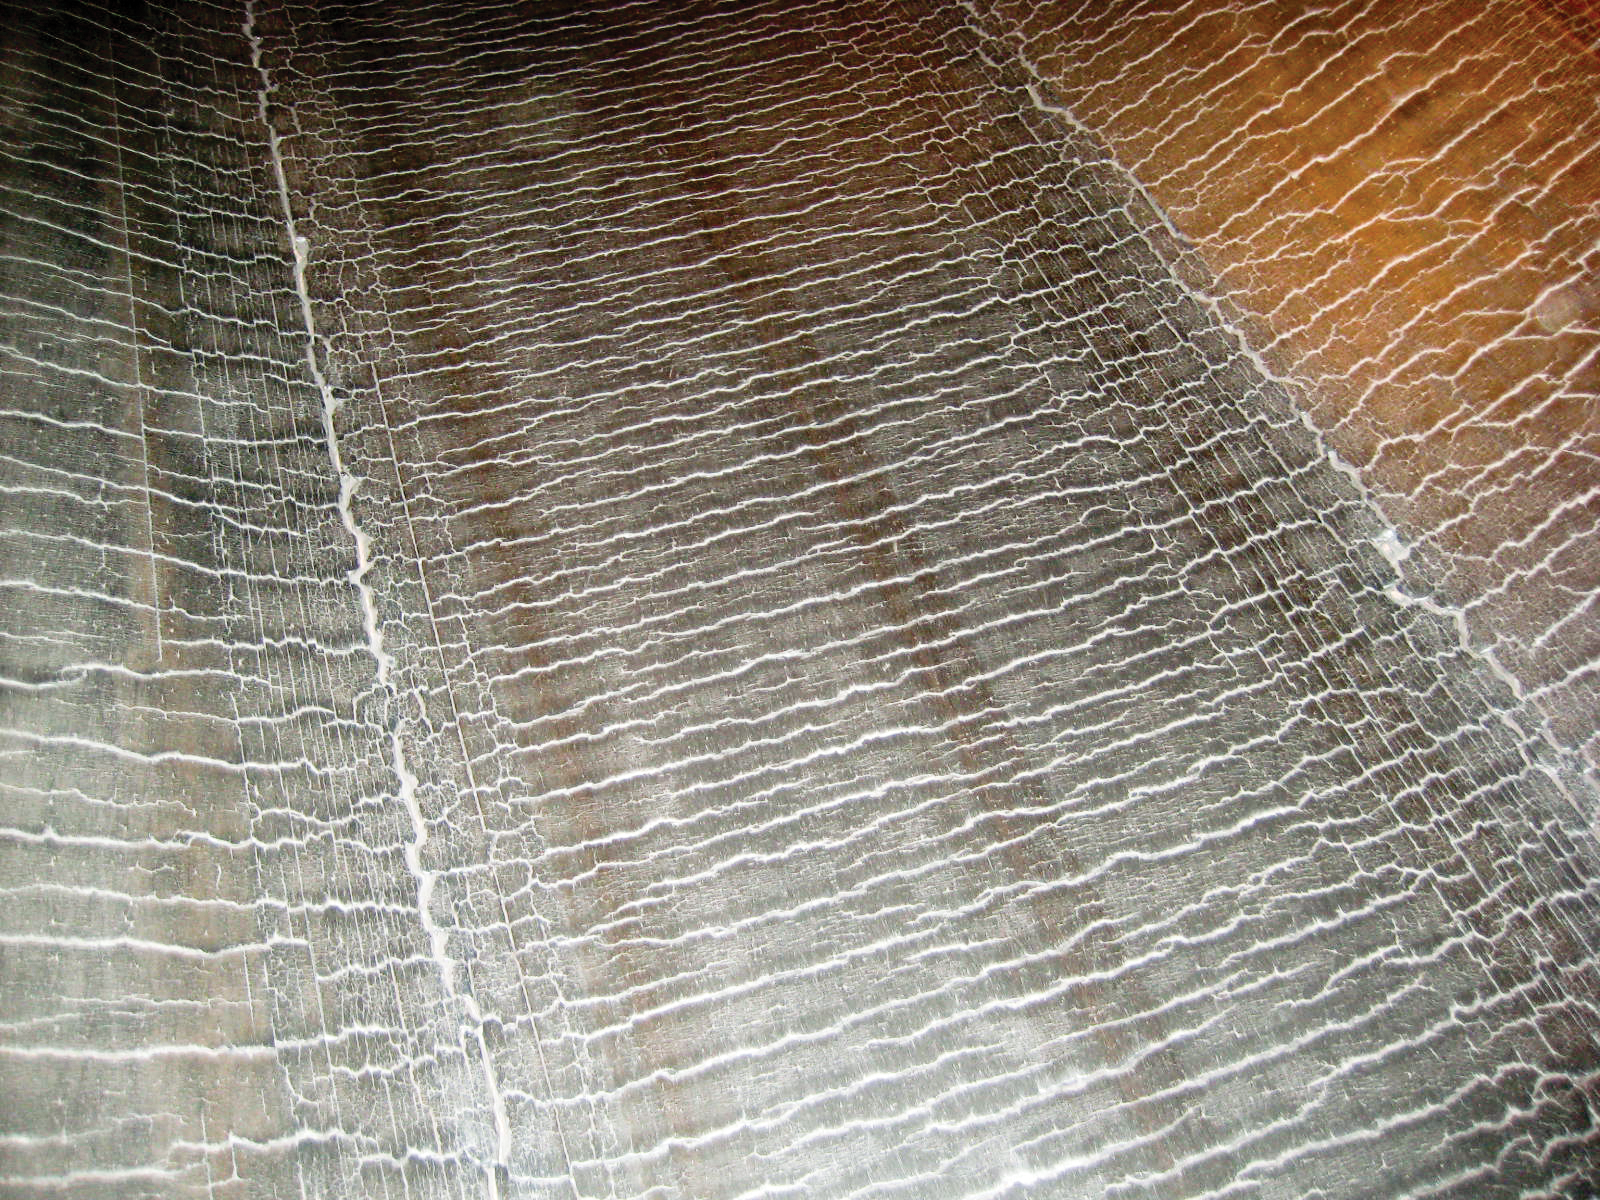 Heat damage visible on the top cover of a conveyor belt.